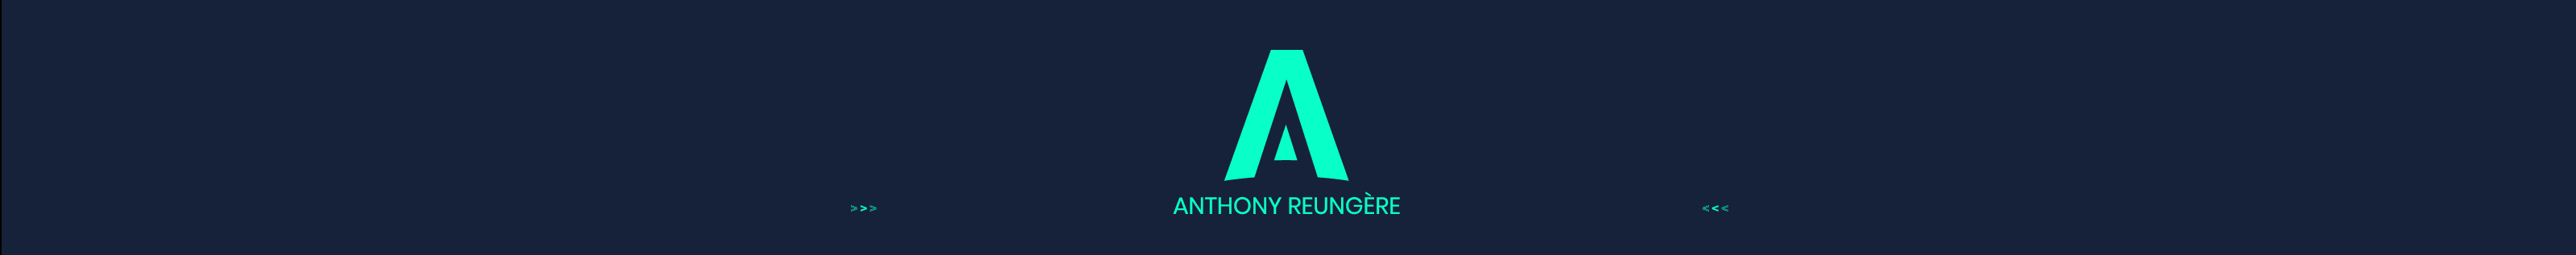 Anthony Reungères profilbanner